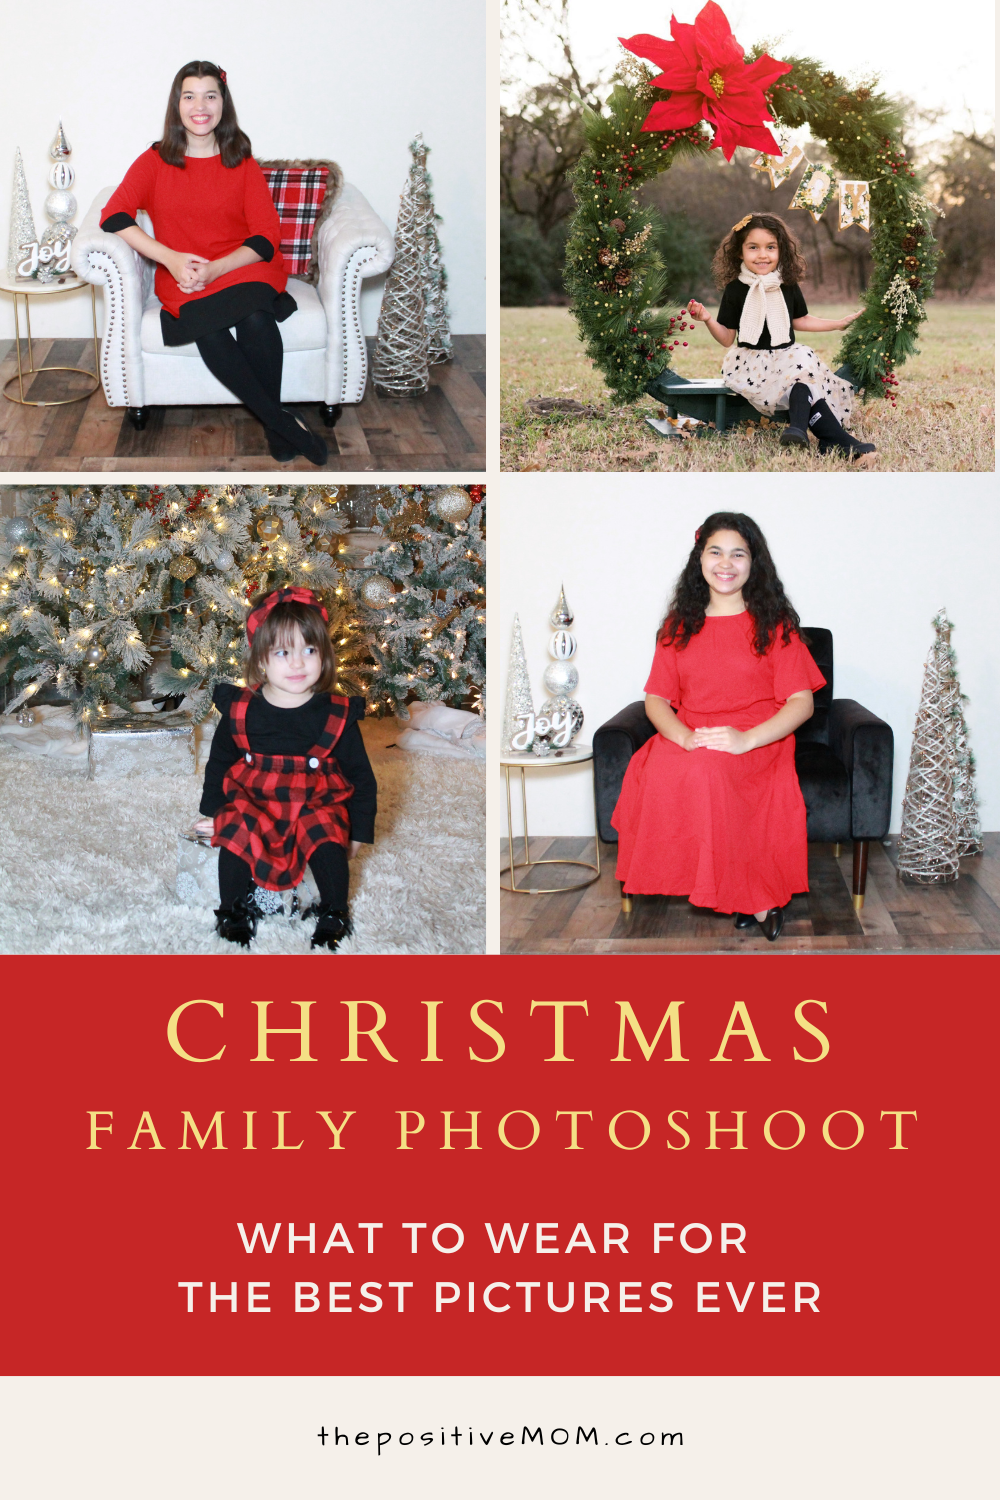 12 Christmas Photo Ideas For Fun Holiday Photoshoots | Away Lands | Holiday  photoshoot, Christmas instagram pictures, Christmas photography